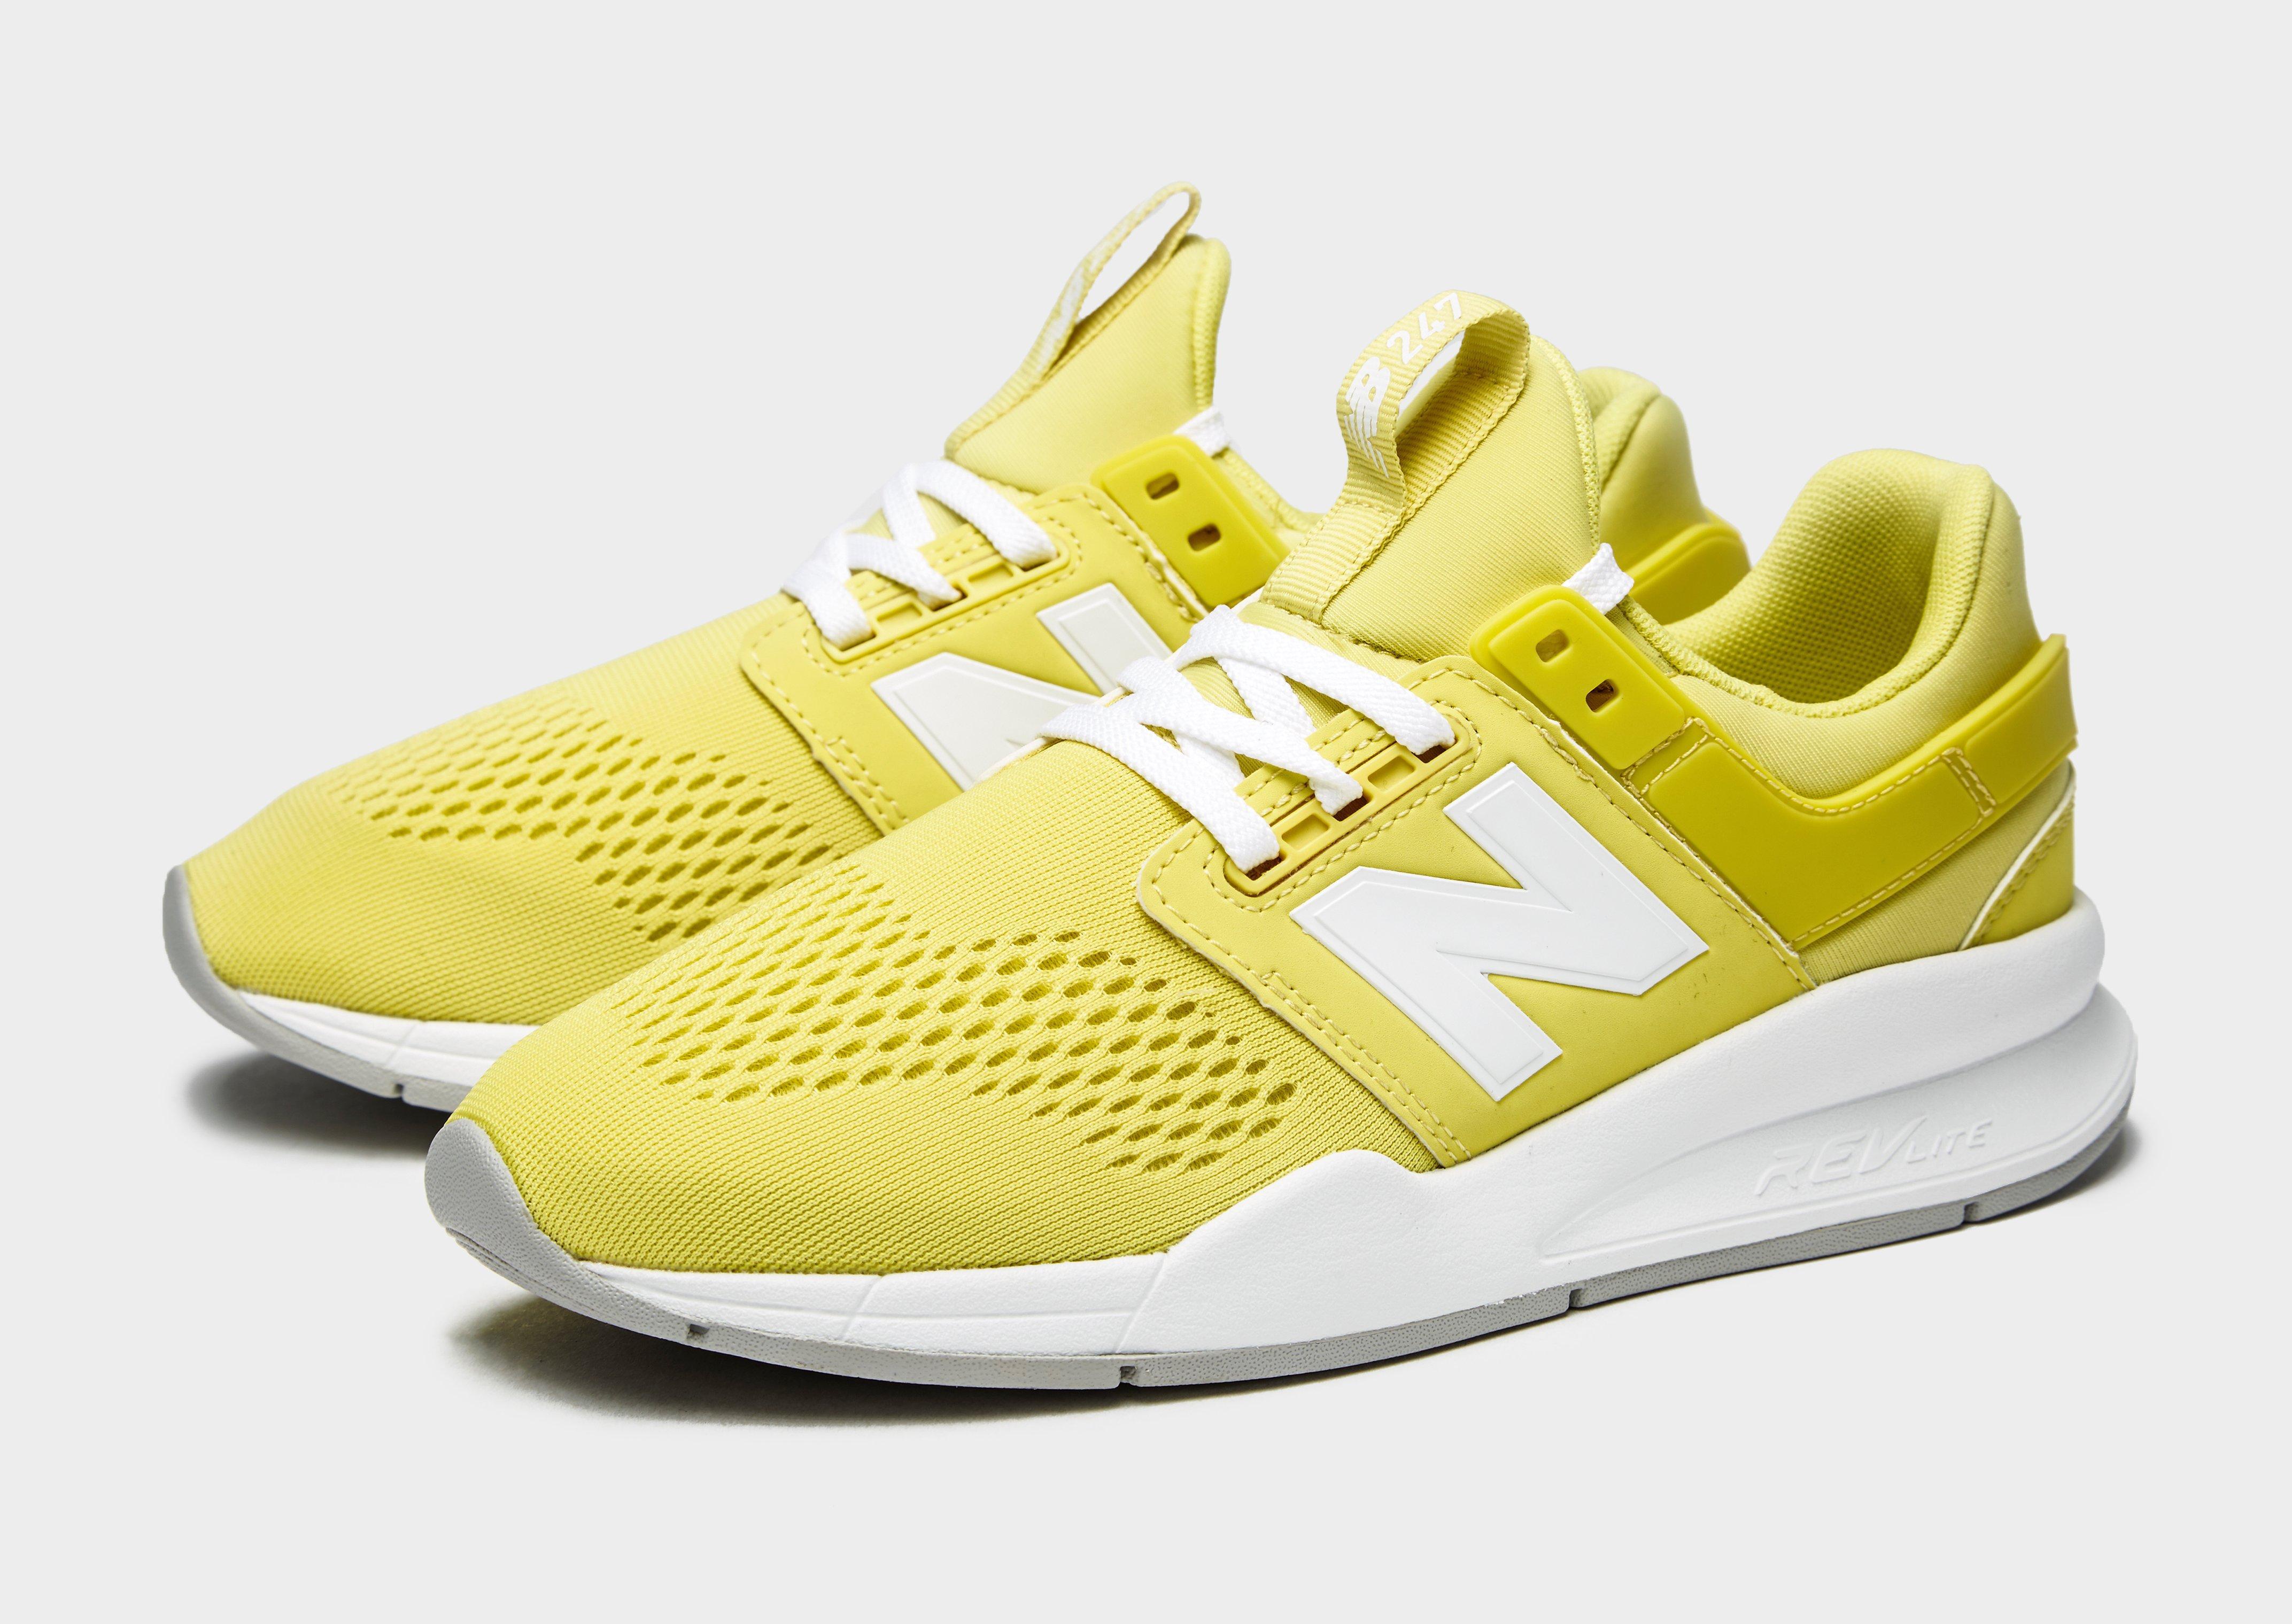 New Balance Synthetic 247v2 Trainers in 